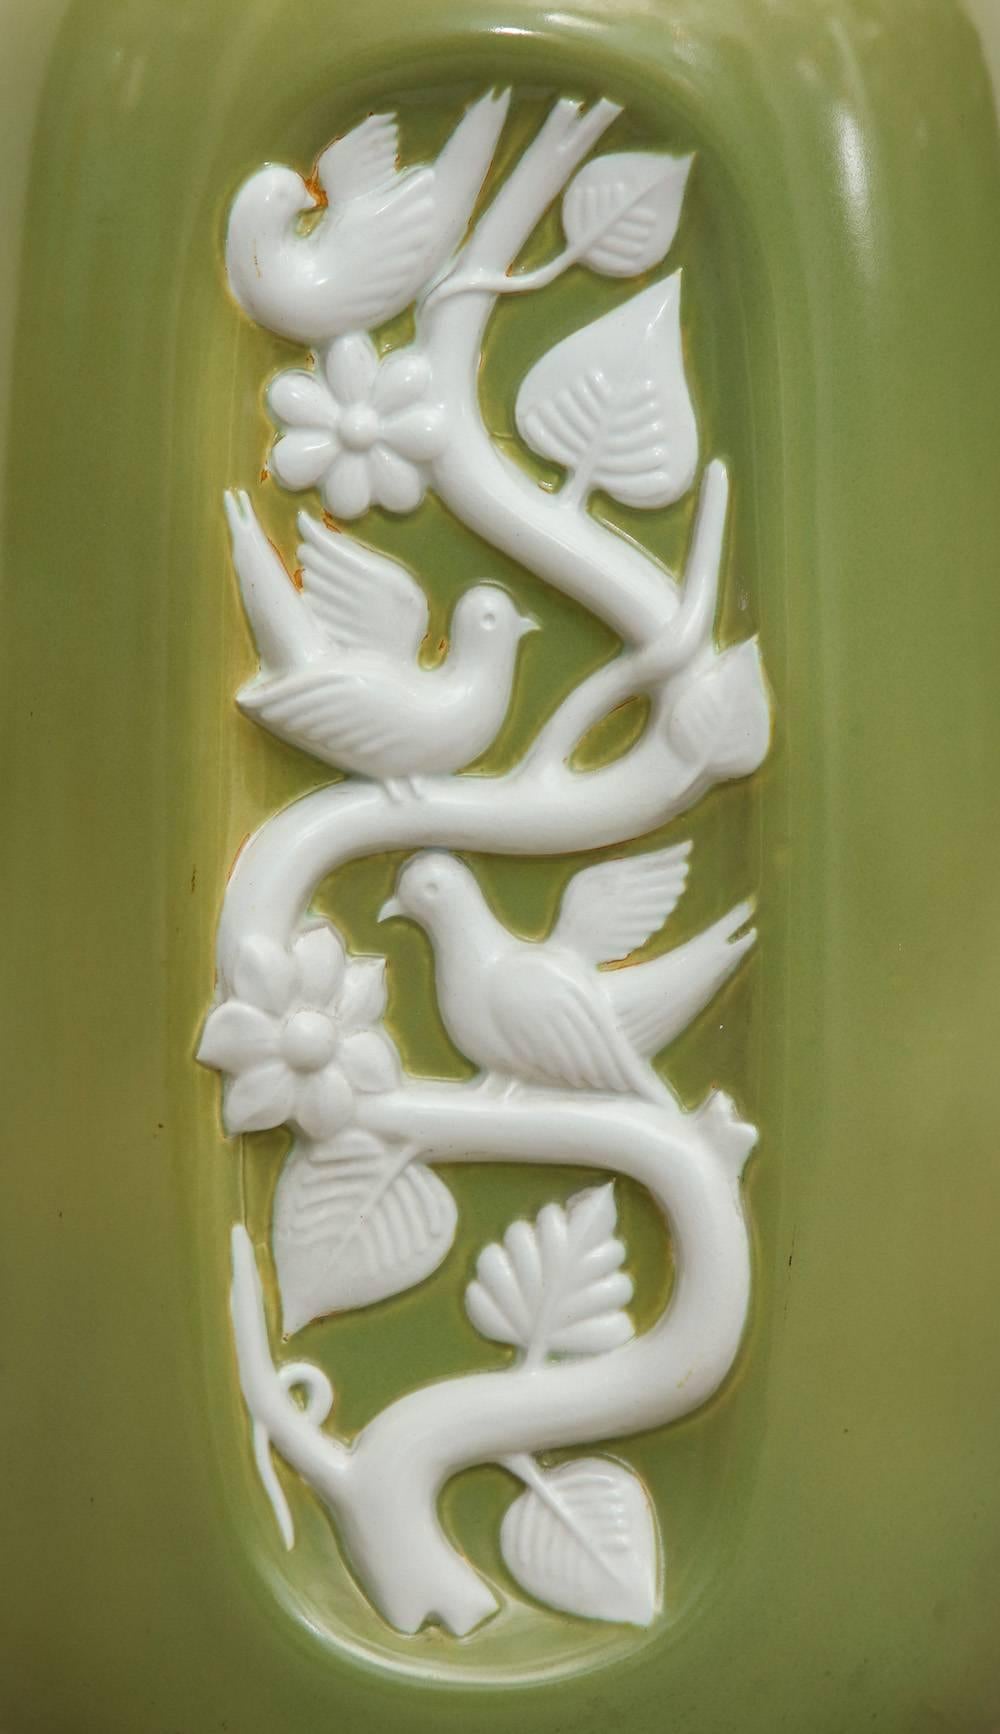 Monumental vase by Giovanni Gariboldi for Richard Ginori.
Fantastic over-scaled porcelain vase with large indent and textured relief of doves on branches. This was created during the period when Gariboldi was the design director of Ginori. Glazes in